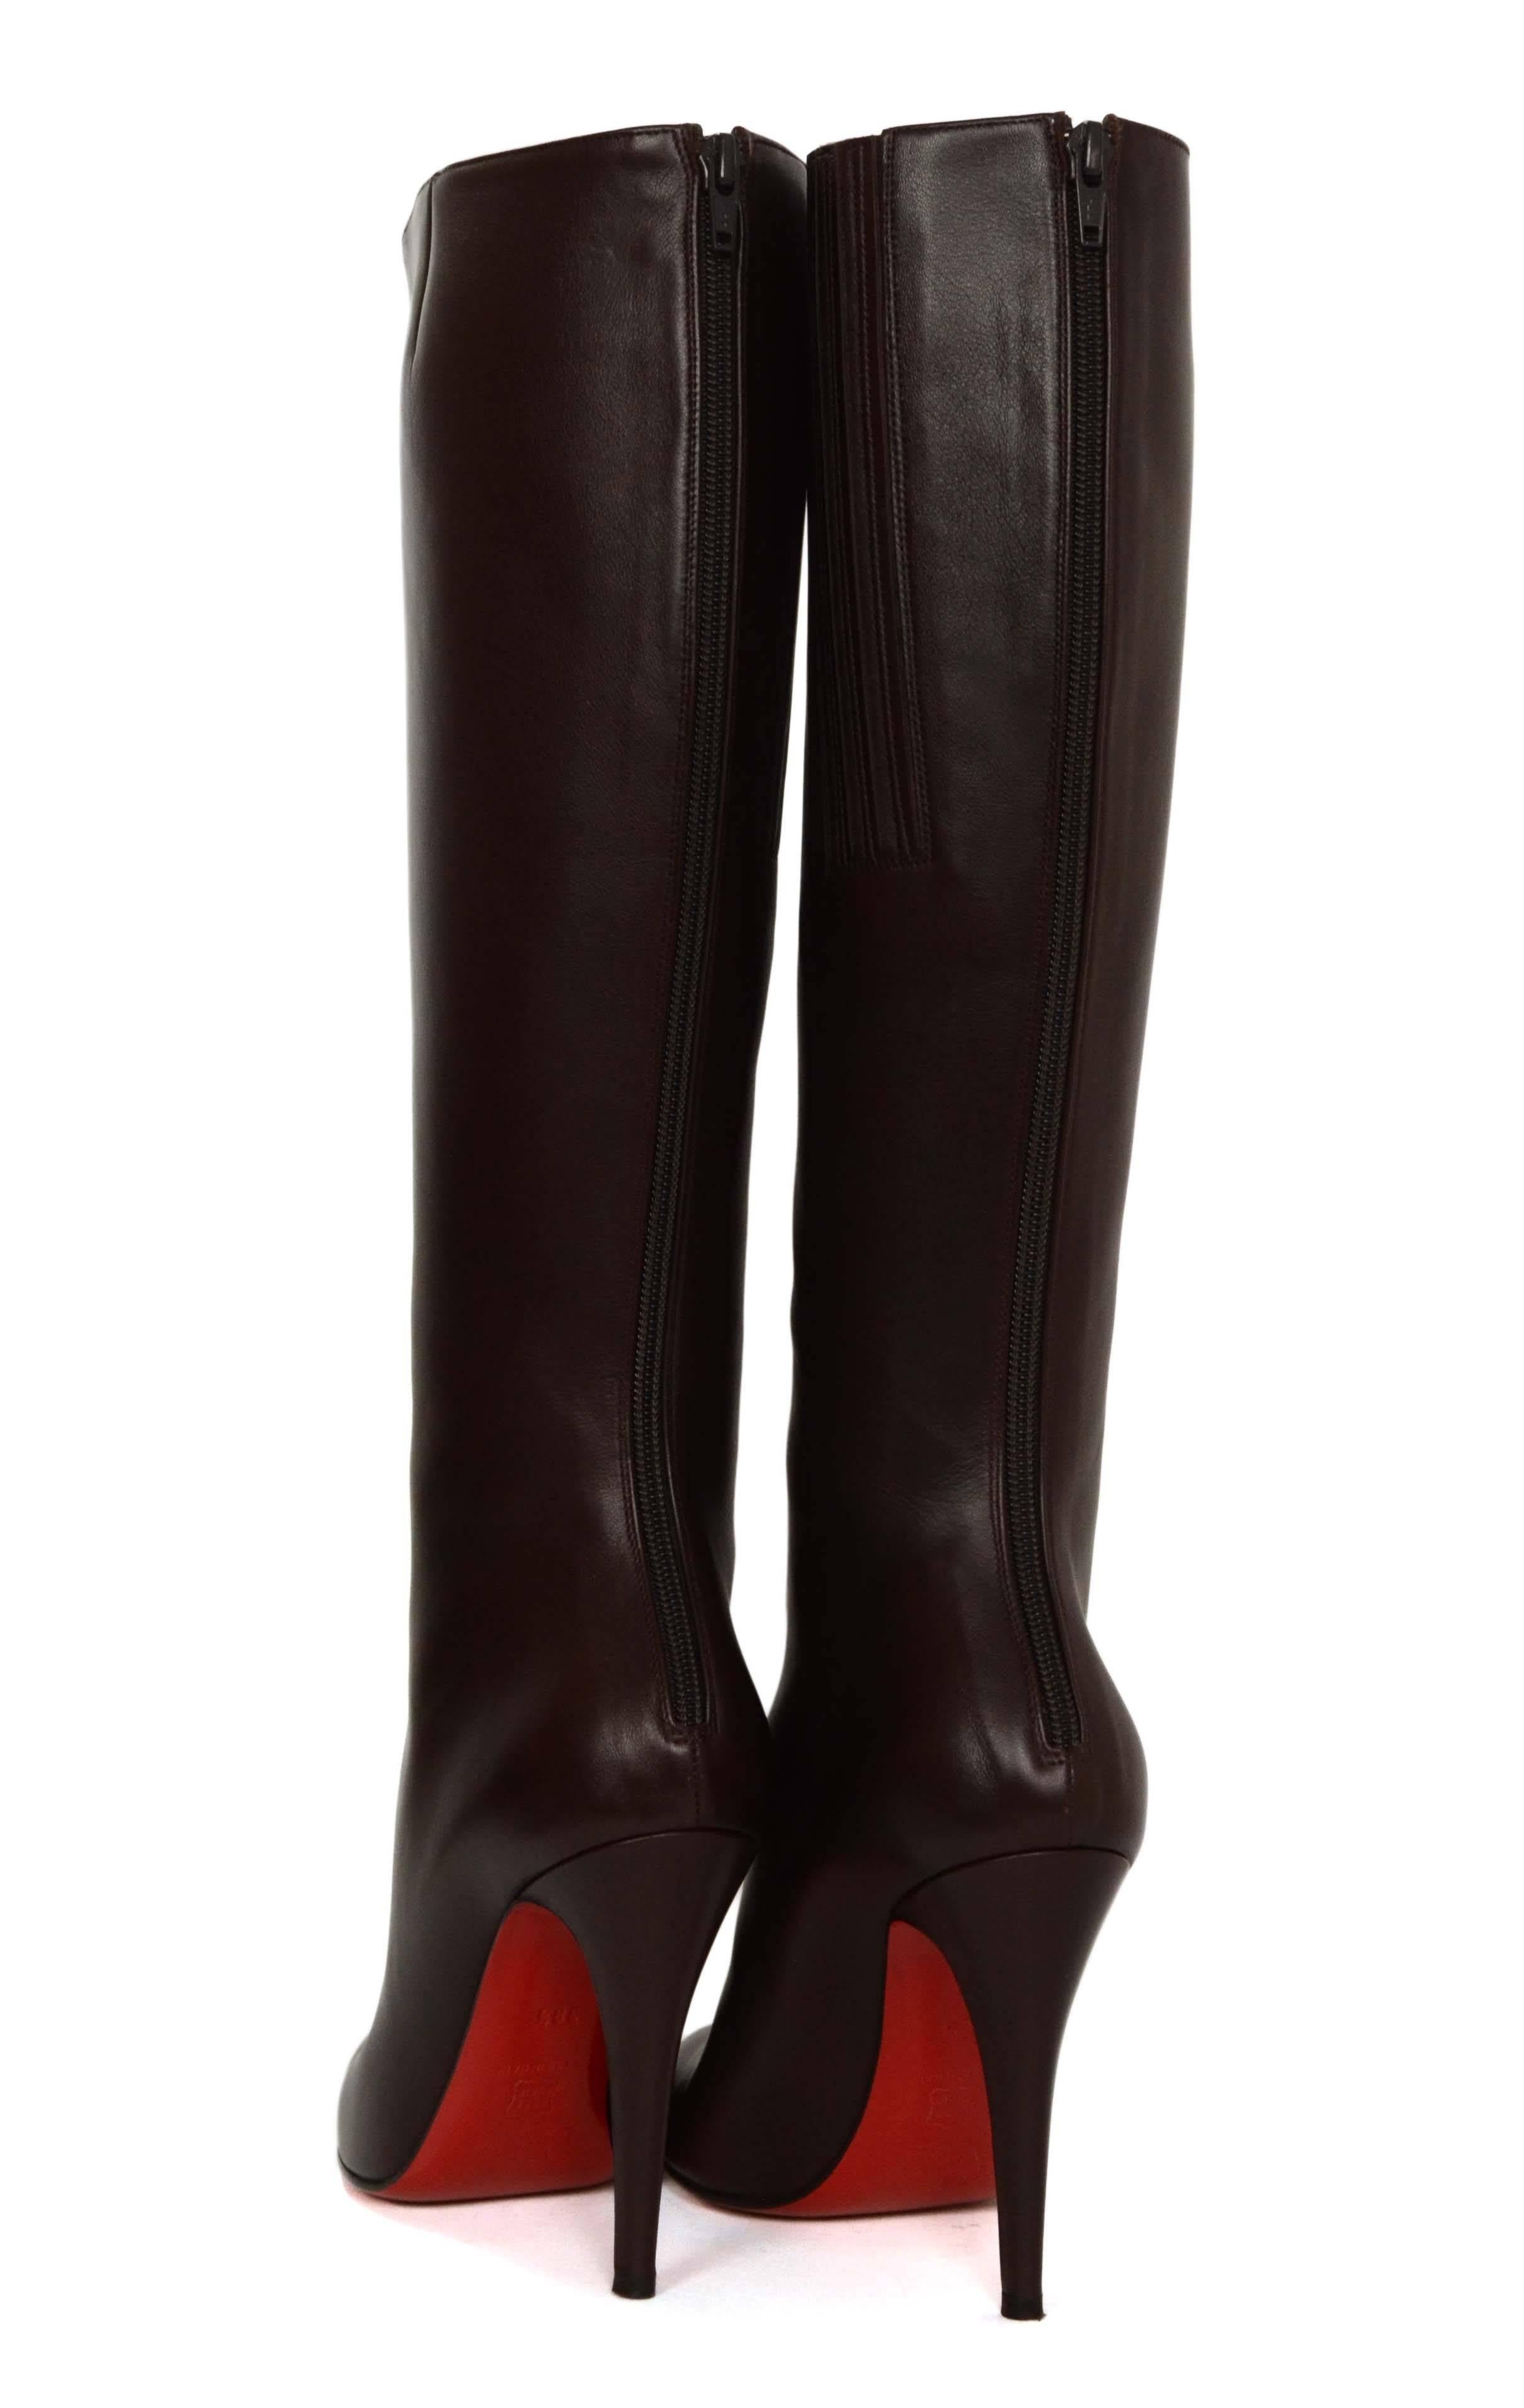 Christian Louboutin Brown Leather Babel 100 Tall Boots sz 38.5 rt. $1, 495 1